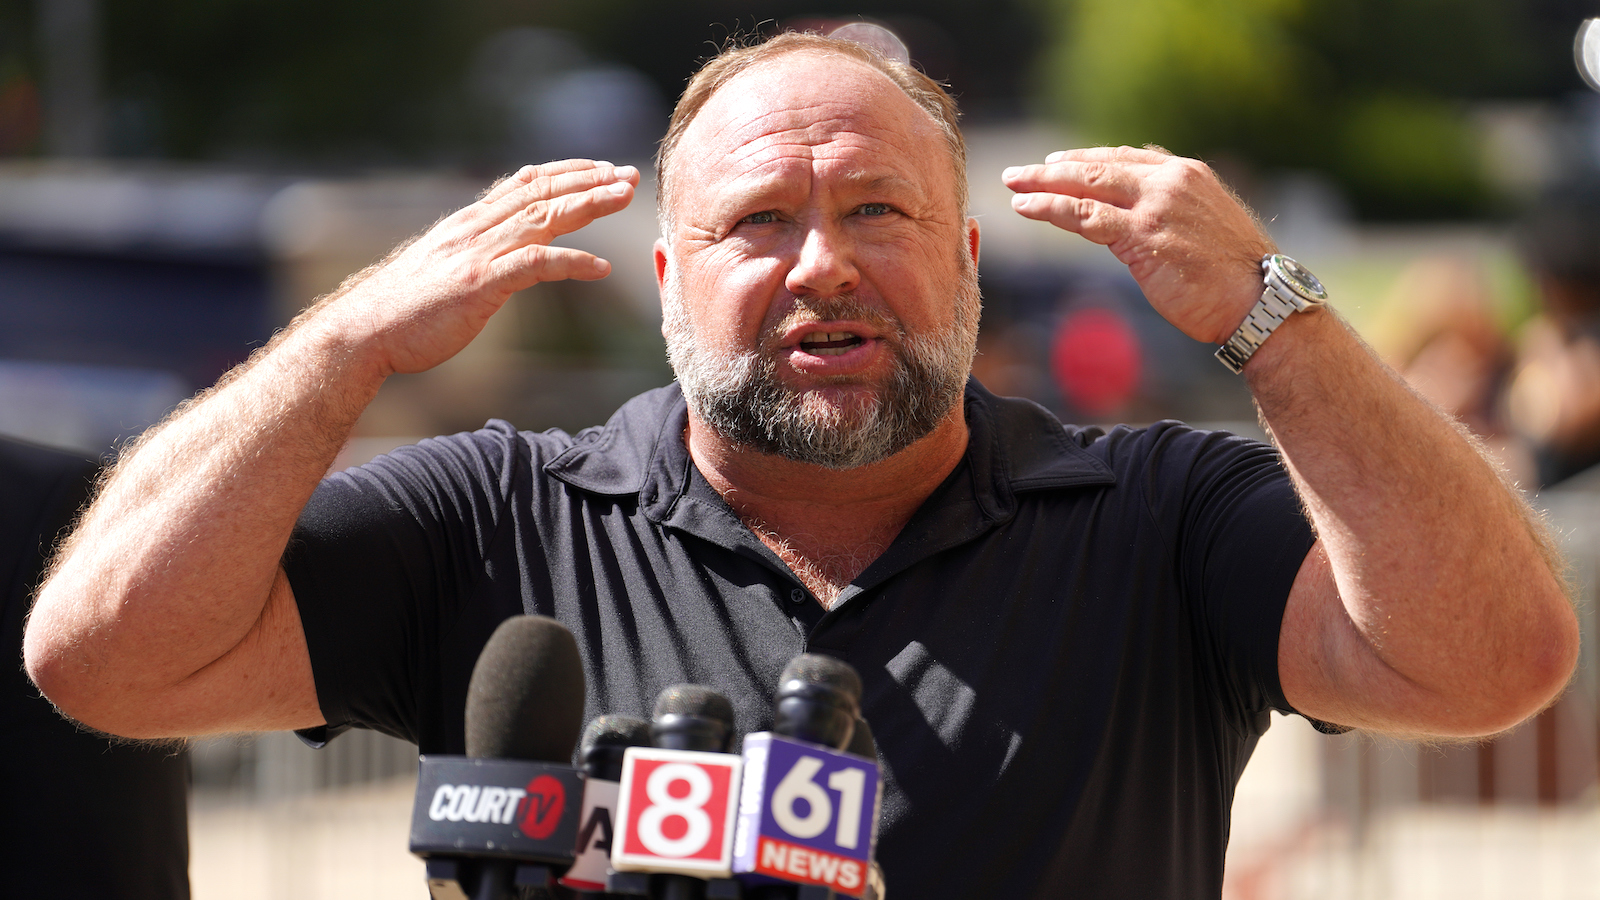 InfoWars founder Alex Jones speaks to the media outside Waterbury Superior Court during his trial on September 21, 2022 in Waterbury, Connecticut. Jones is being sued by several victims' families for causing emotional and psychological harm after they lost their children in the Sandy Hook massacre.